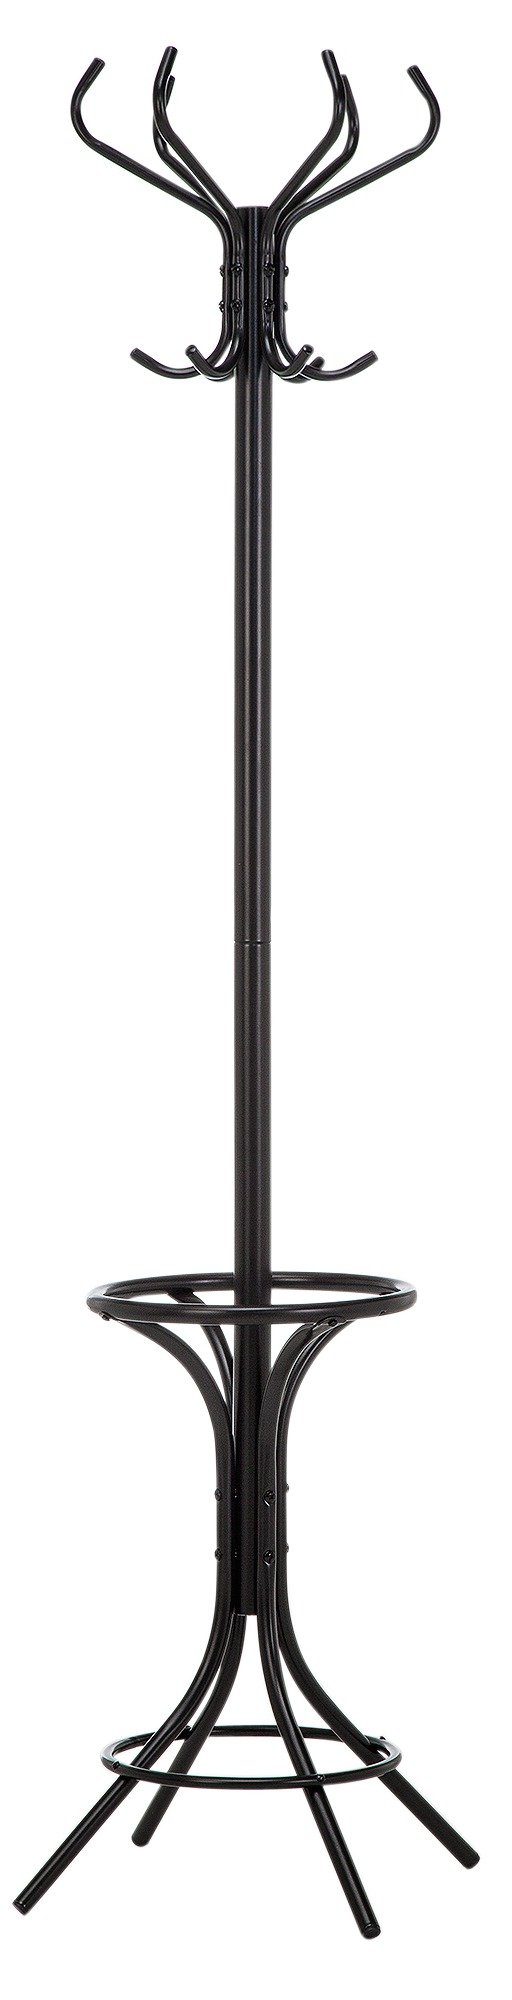 Argos Home Hat and Coat Stand - Black